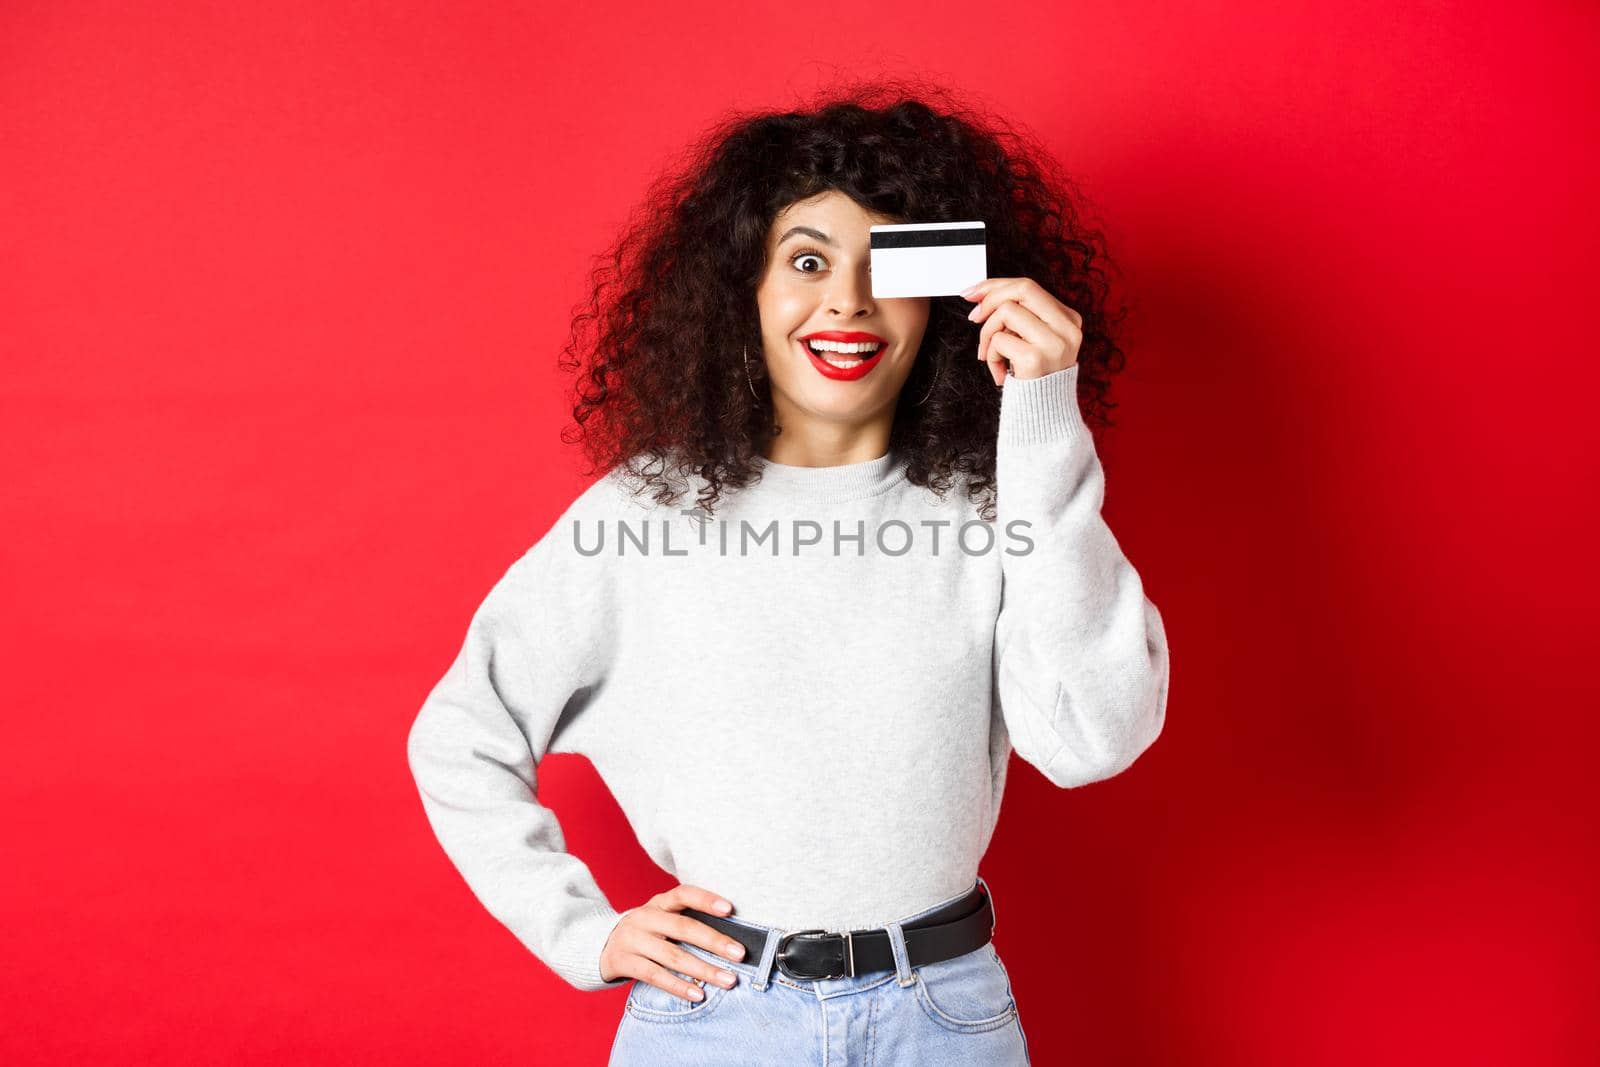 Stylish girl with curly hair showing plastic credit card over eye and smiling, standing against red background.